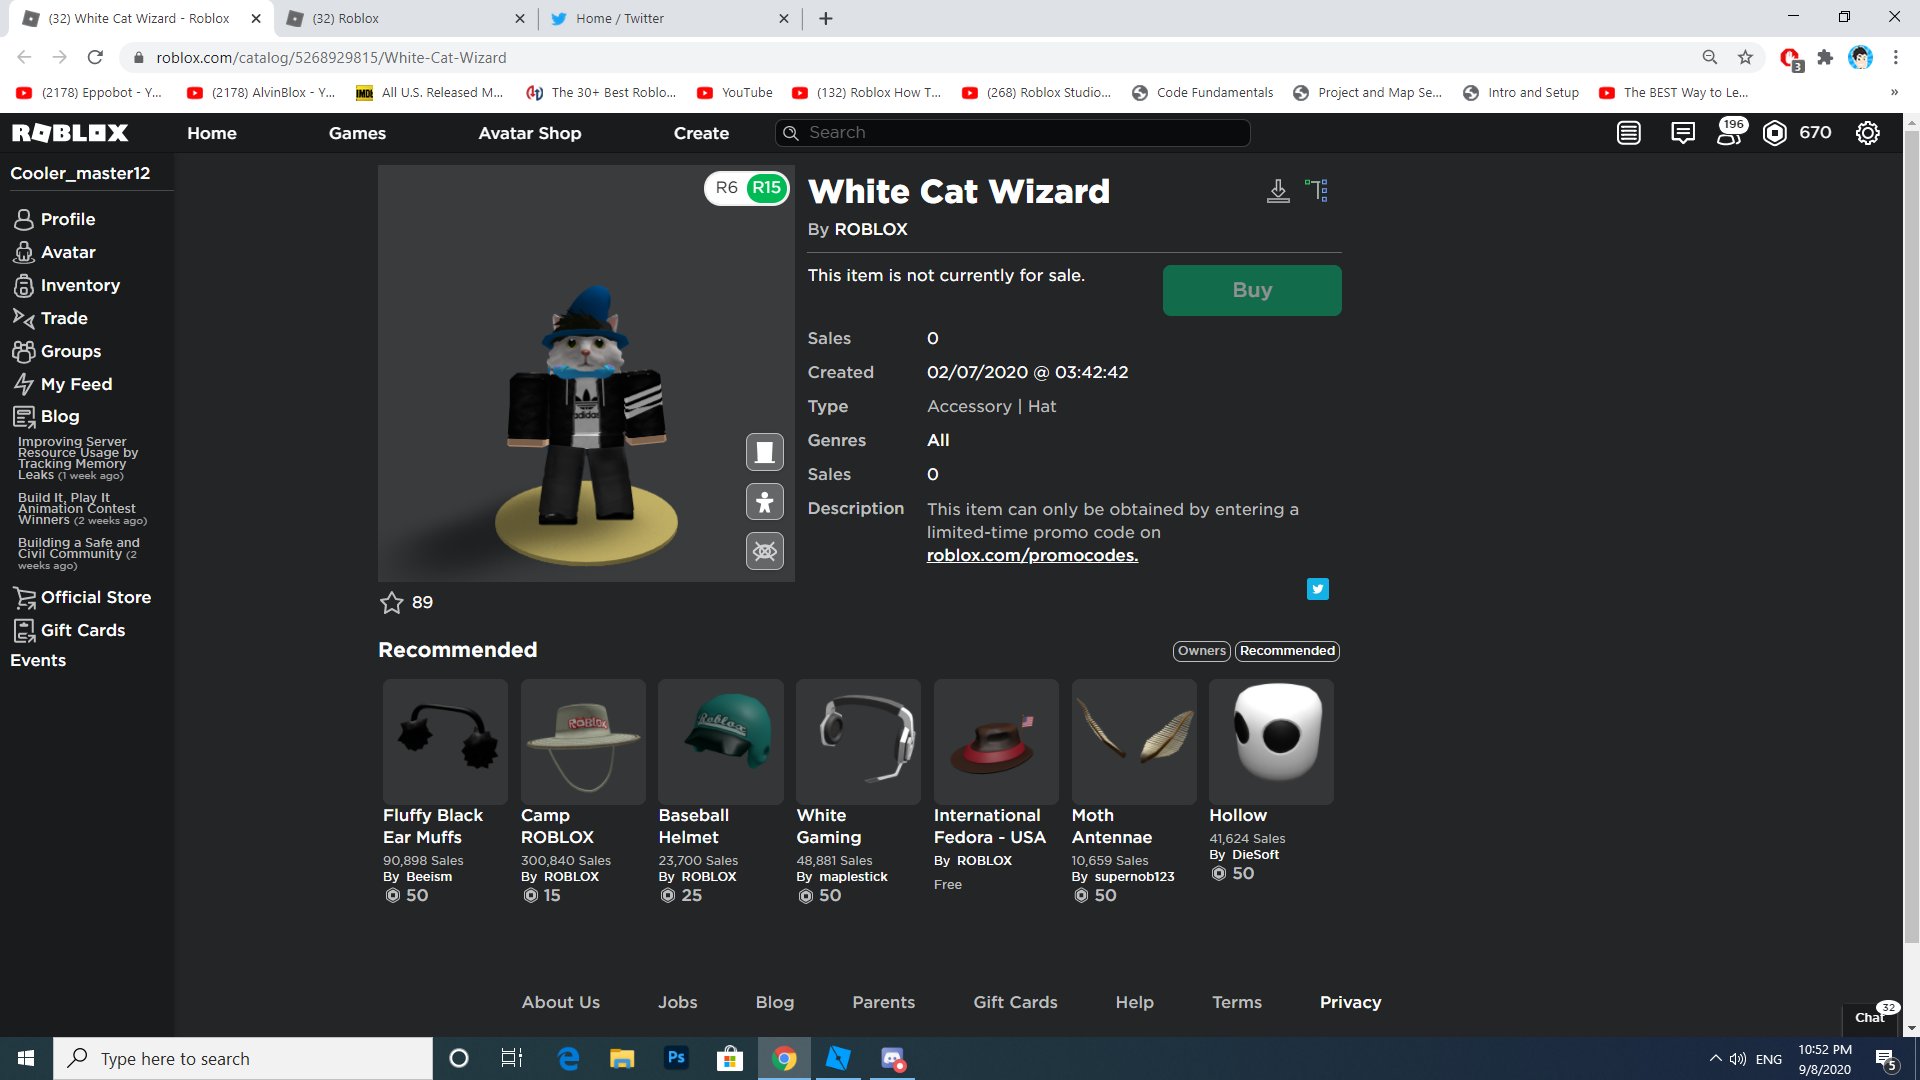 Choco Stick On Twitter Hi Quys Roblox Guys Released A New Promocode Item Pls Like And Retweet This Roblox Roblox Robloxdev Robloxdev - wizard cat roblox promo code